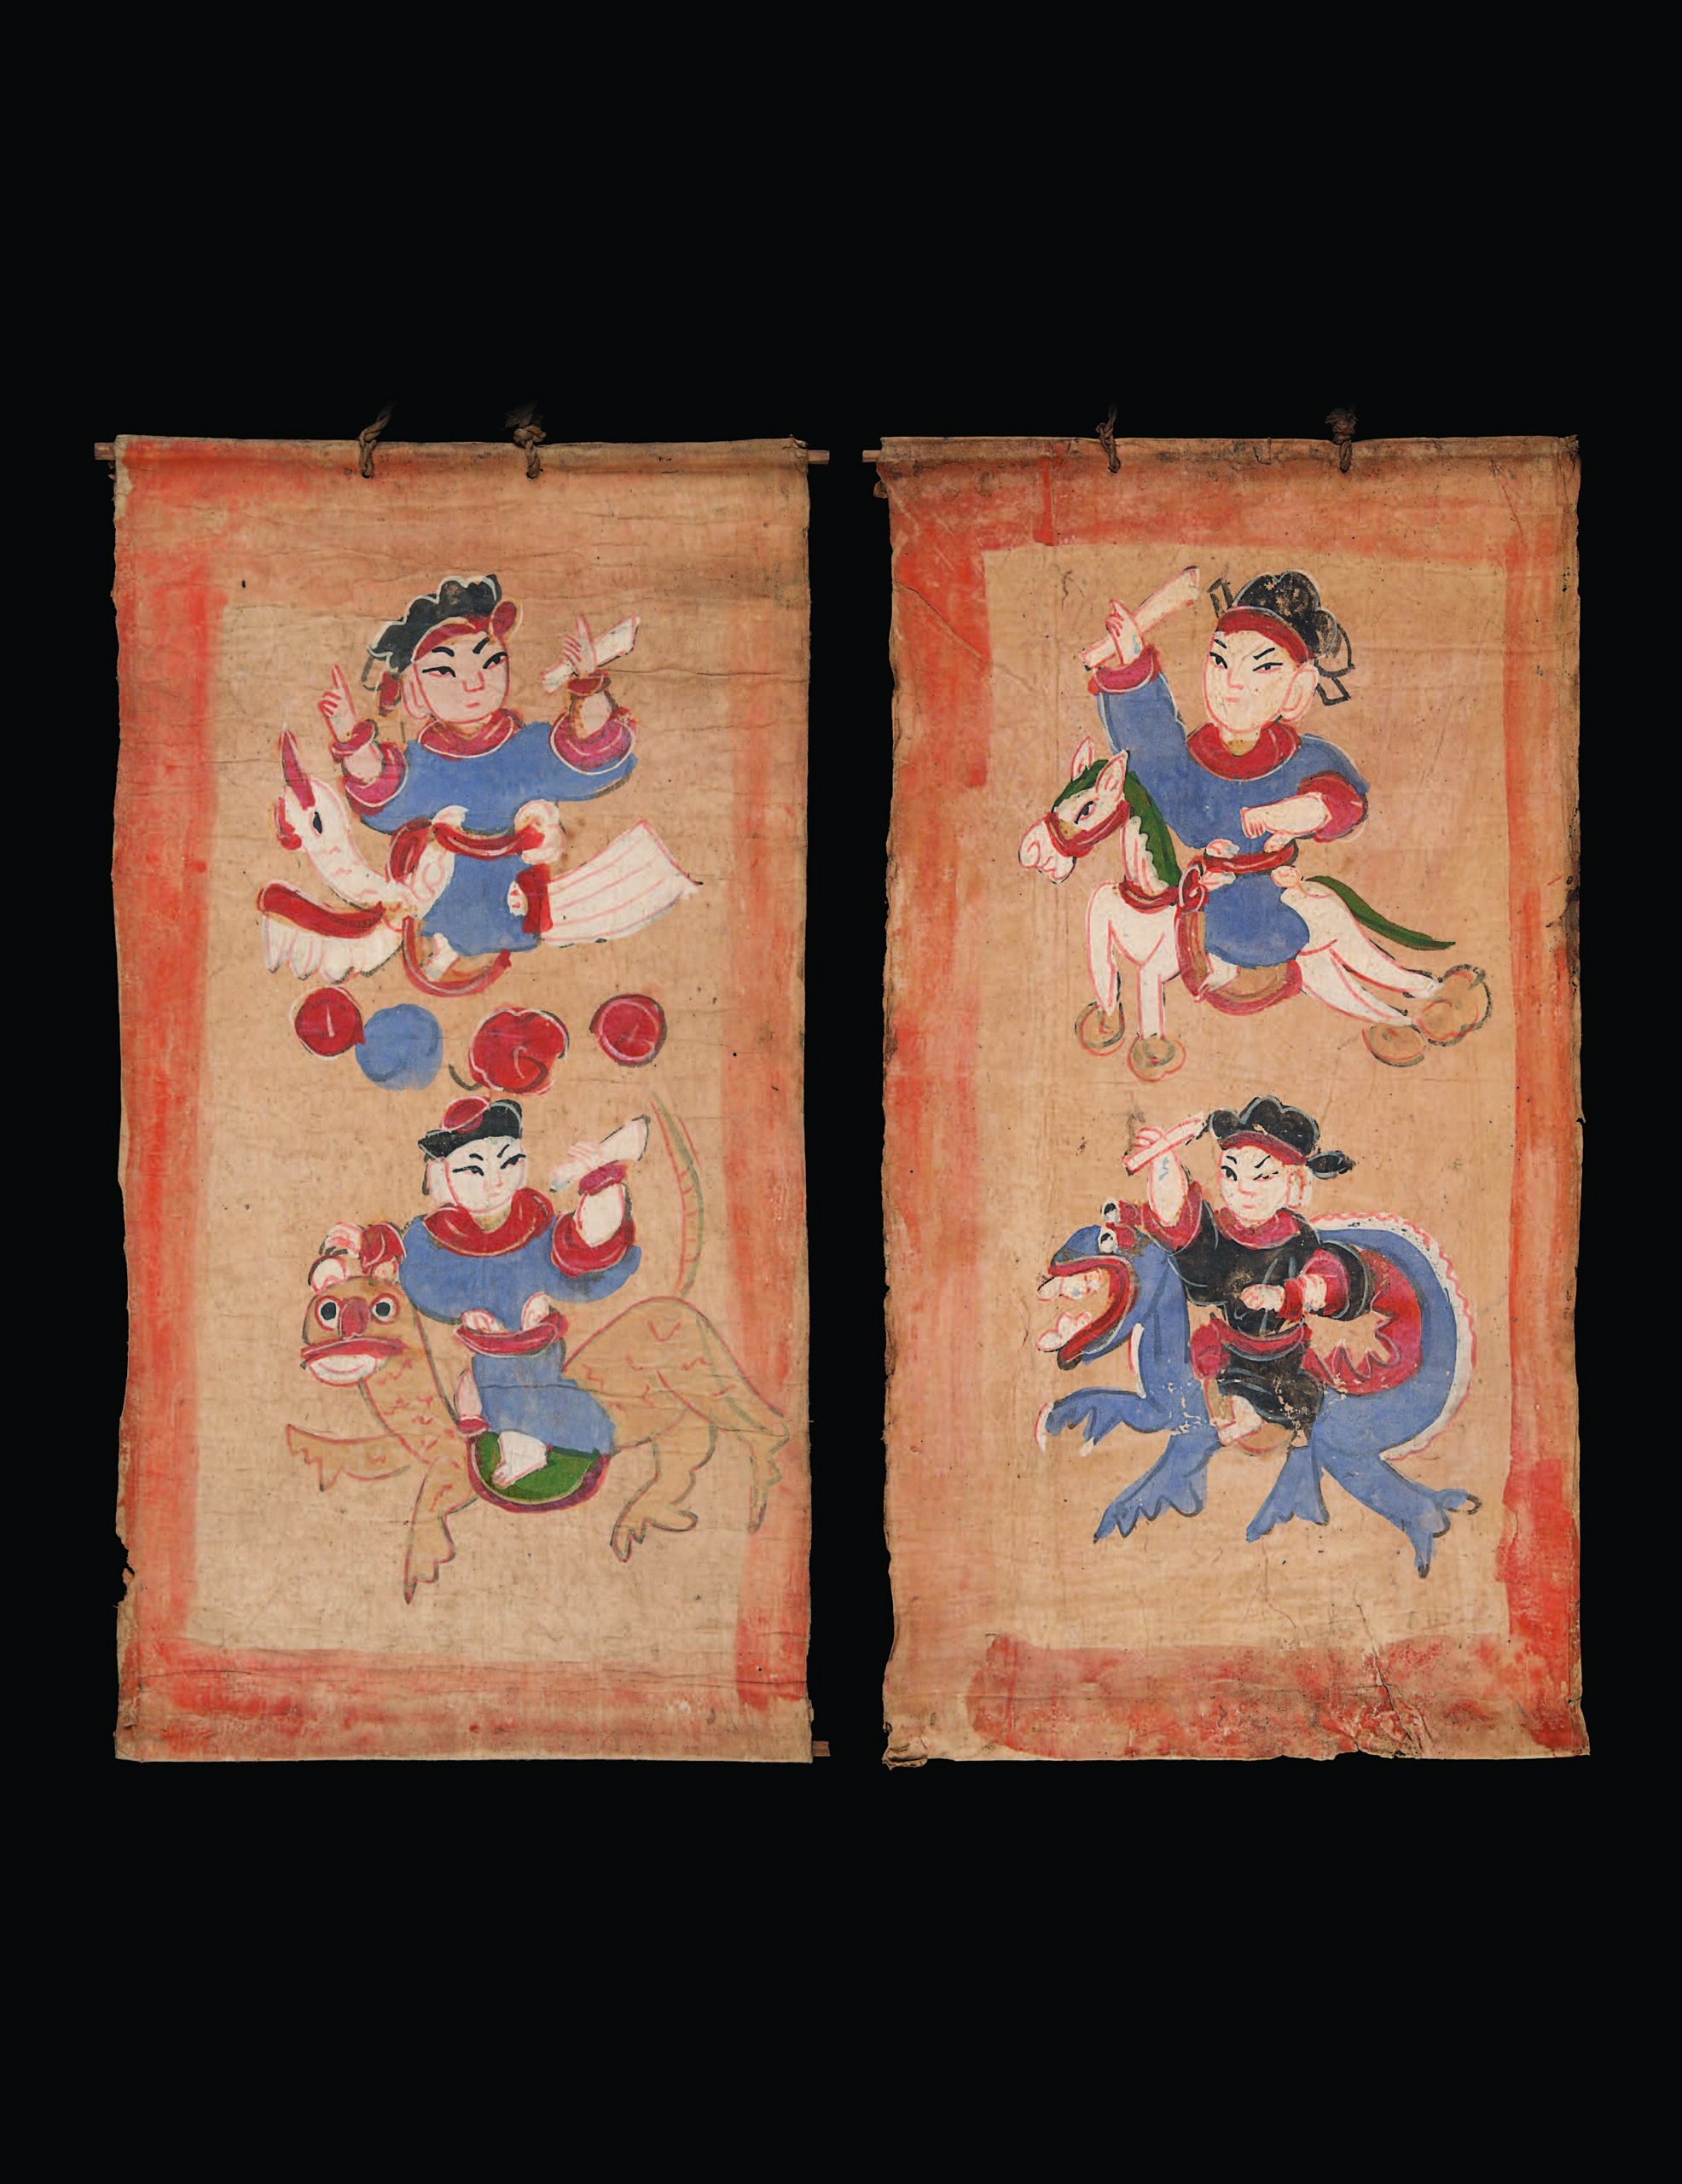 The essential three deity paintings:The High Constable; Minor Hoi Fan (God of the Sea); Heavenly Host (Ancestors), Yao culture, 1879, southern China. Mulberry paper, natural pigments, approximately 44 ½ × 18 inches each. Gift of Mark Rapoport, MD, and Jane C. Hughes. Museum of International Folk Art (A.2015.67.1, A.2015.71.2, A.2015.71.1). Photographs by Blair Clark.